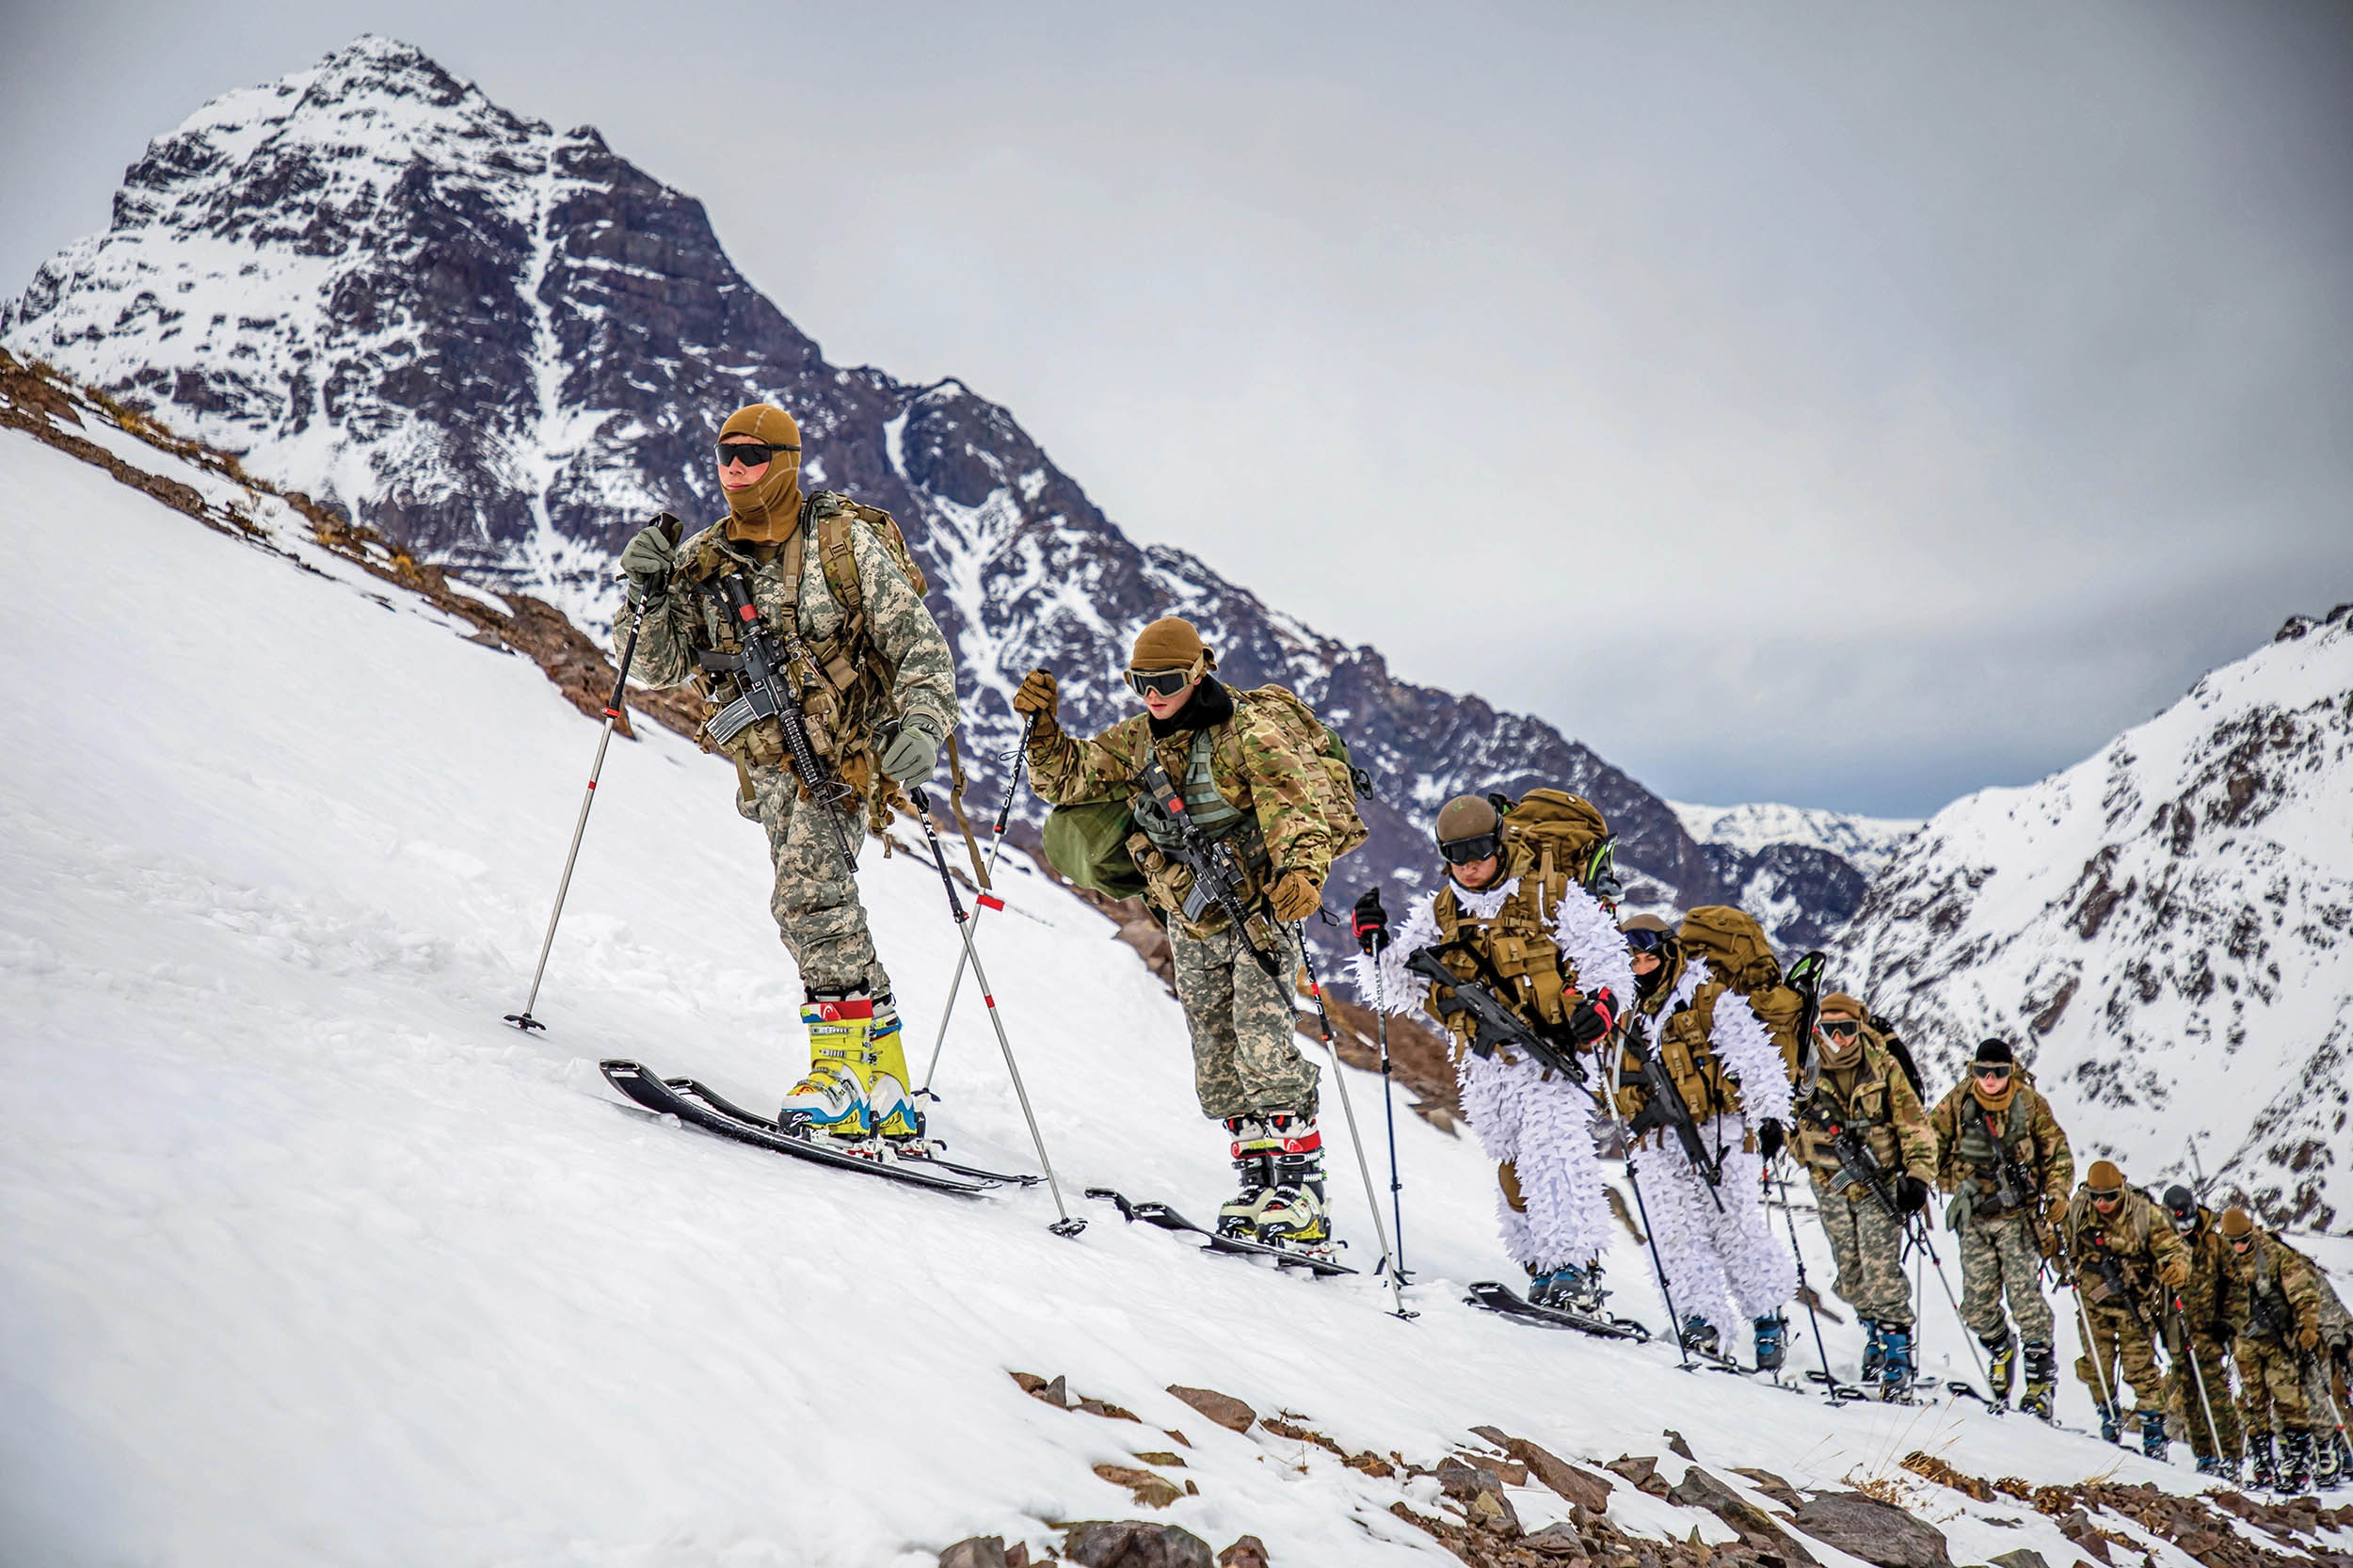 U.S. Army Soldiers assigned to Bravo Company, 2nd Battalion, 87th Infantry Regiment, 2nd Brigade Combat Team, 10th Mountain Division, and Chilean army soldiers assigned to 3rd Mountain Division, cross-country ski at Chilean Army Mountain School in Portillo, Chile, August 27, 2021 (U.S. Army/Joshua Taeckens)